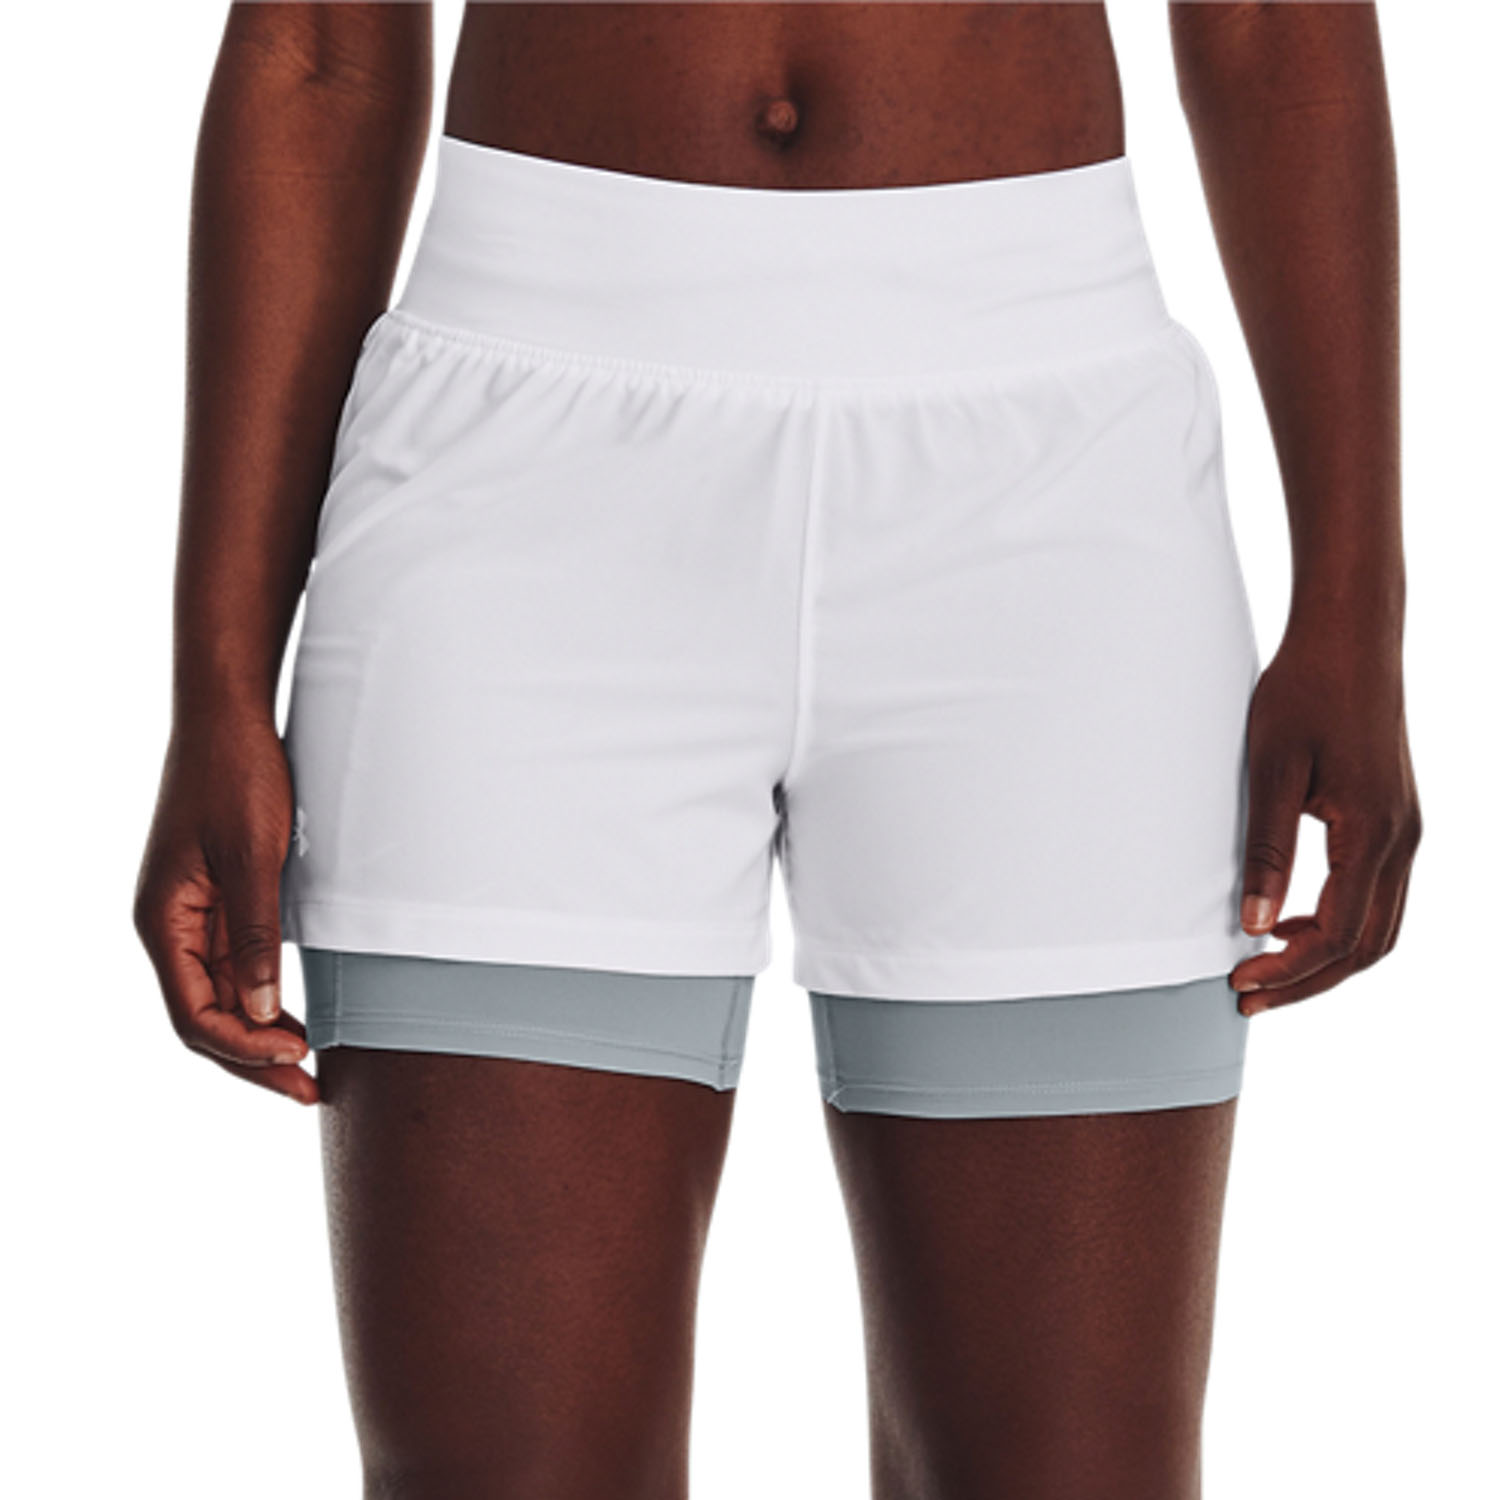 Under Armour Elite 2 in 1 3in Shorts - White/Reflective